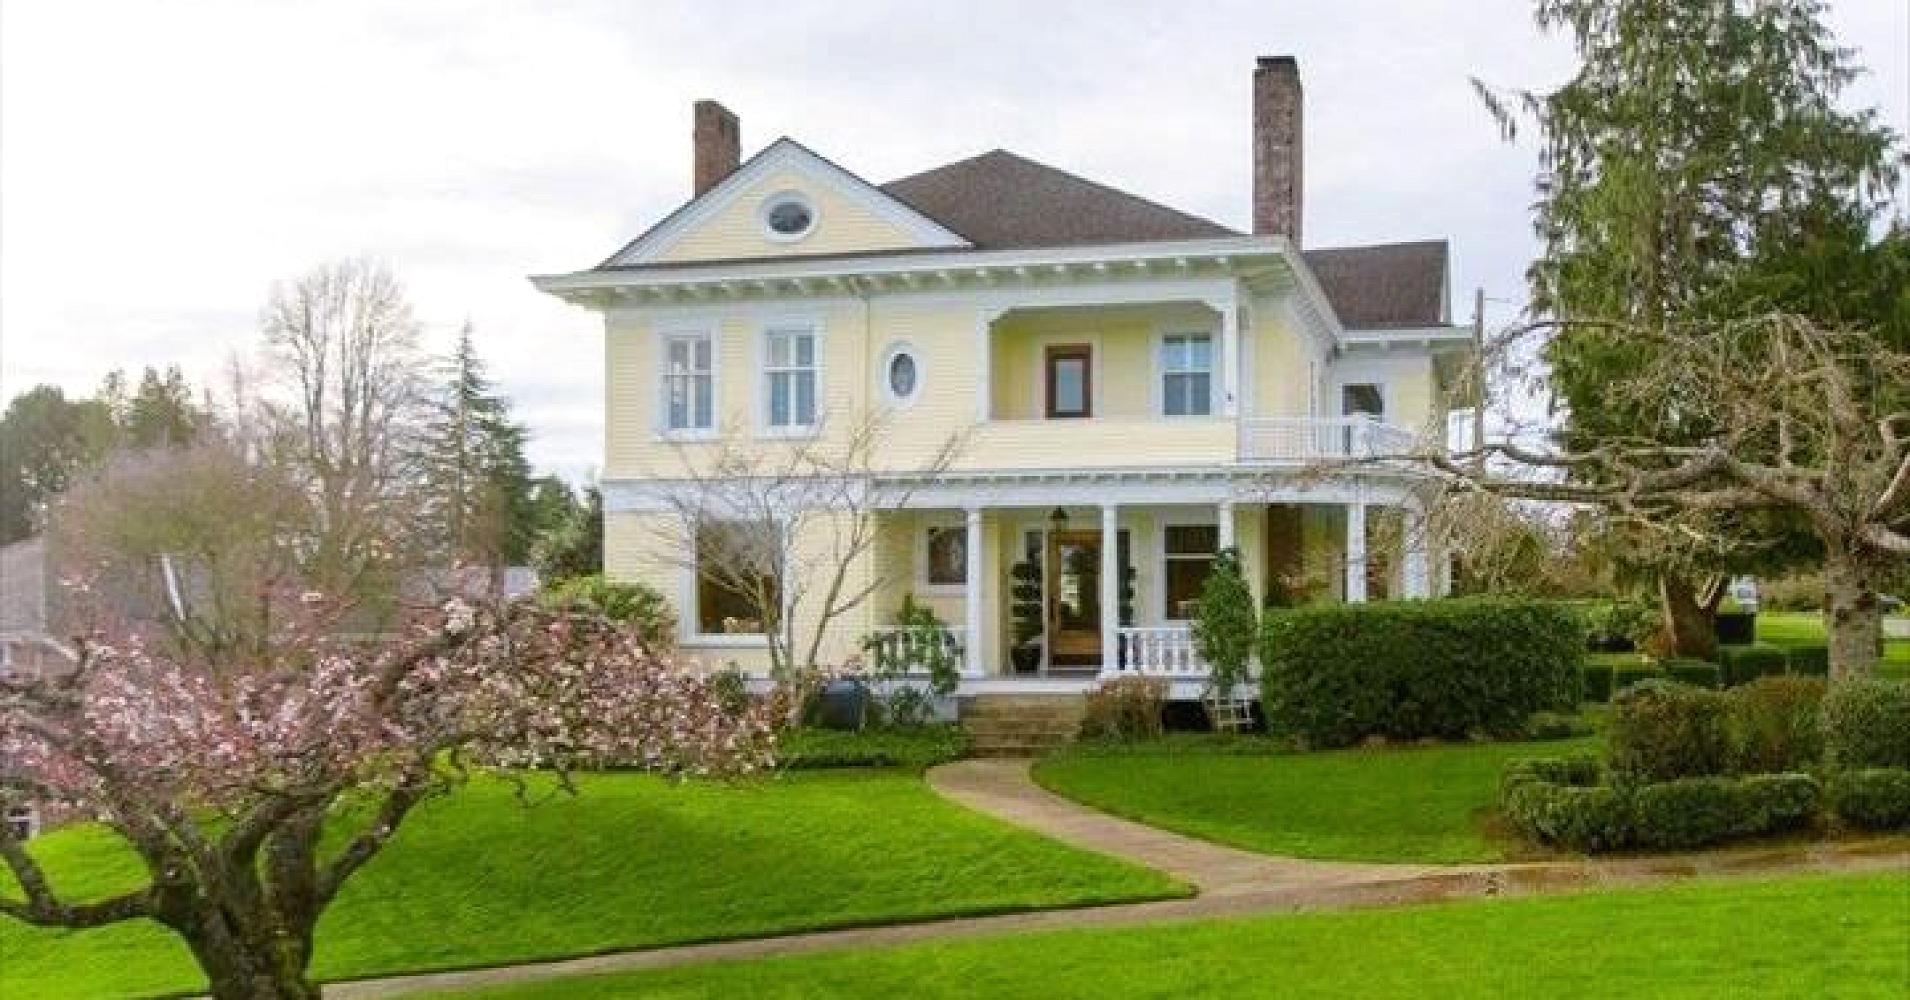 The house from '10 Things I Hate About You' just sold for $1.6 million—take a look inside